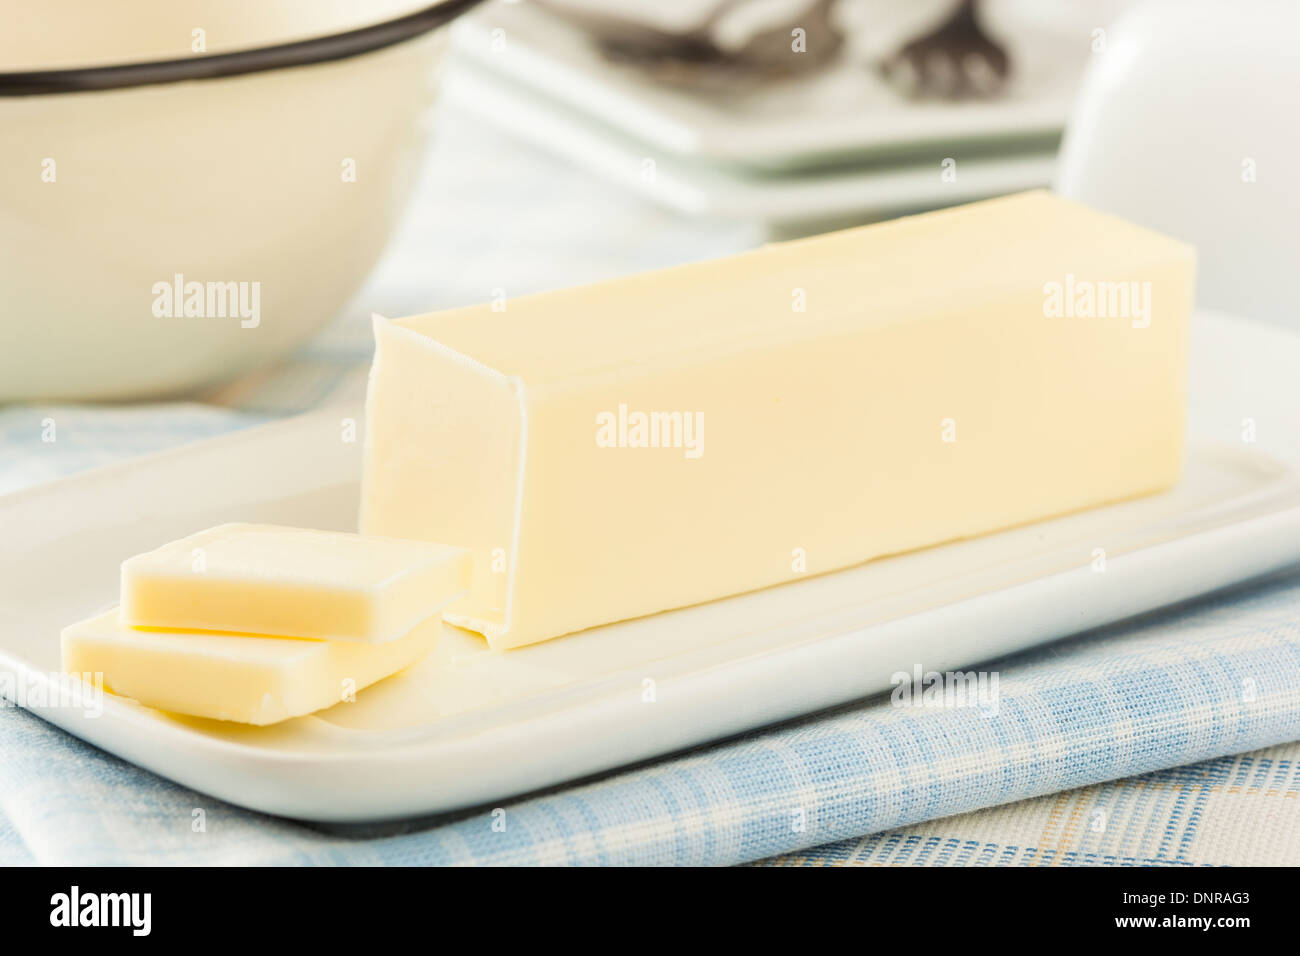 Organic Dairy Yellow Butter an Ingredient for Cooking Stock Photo